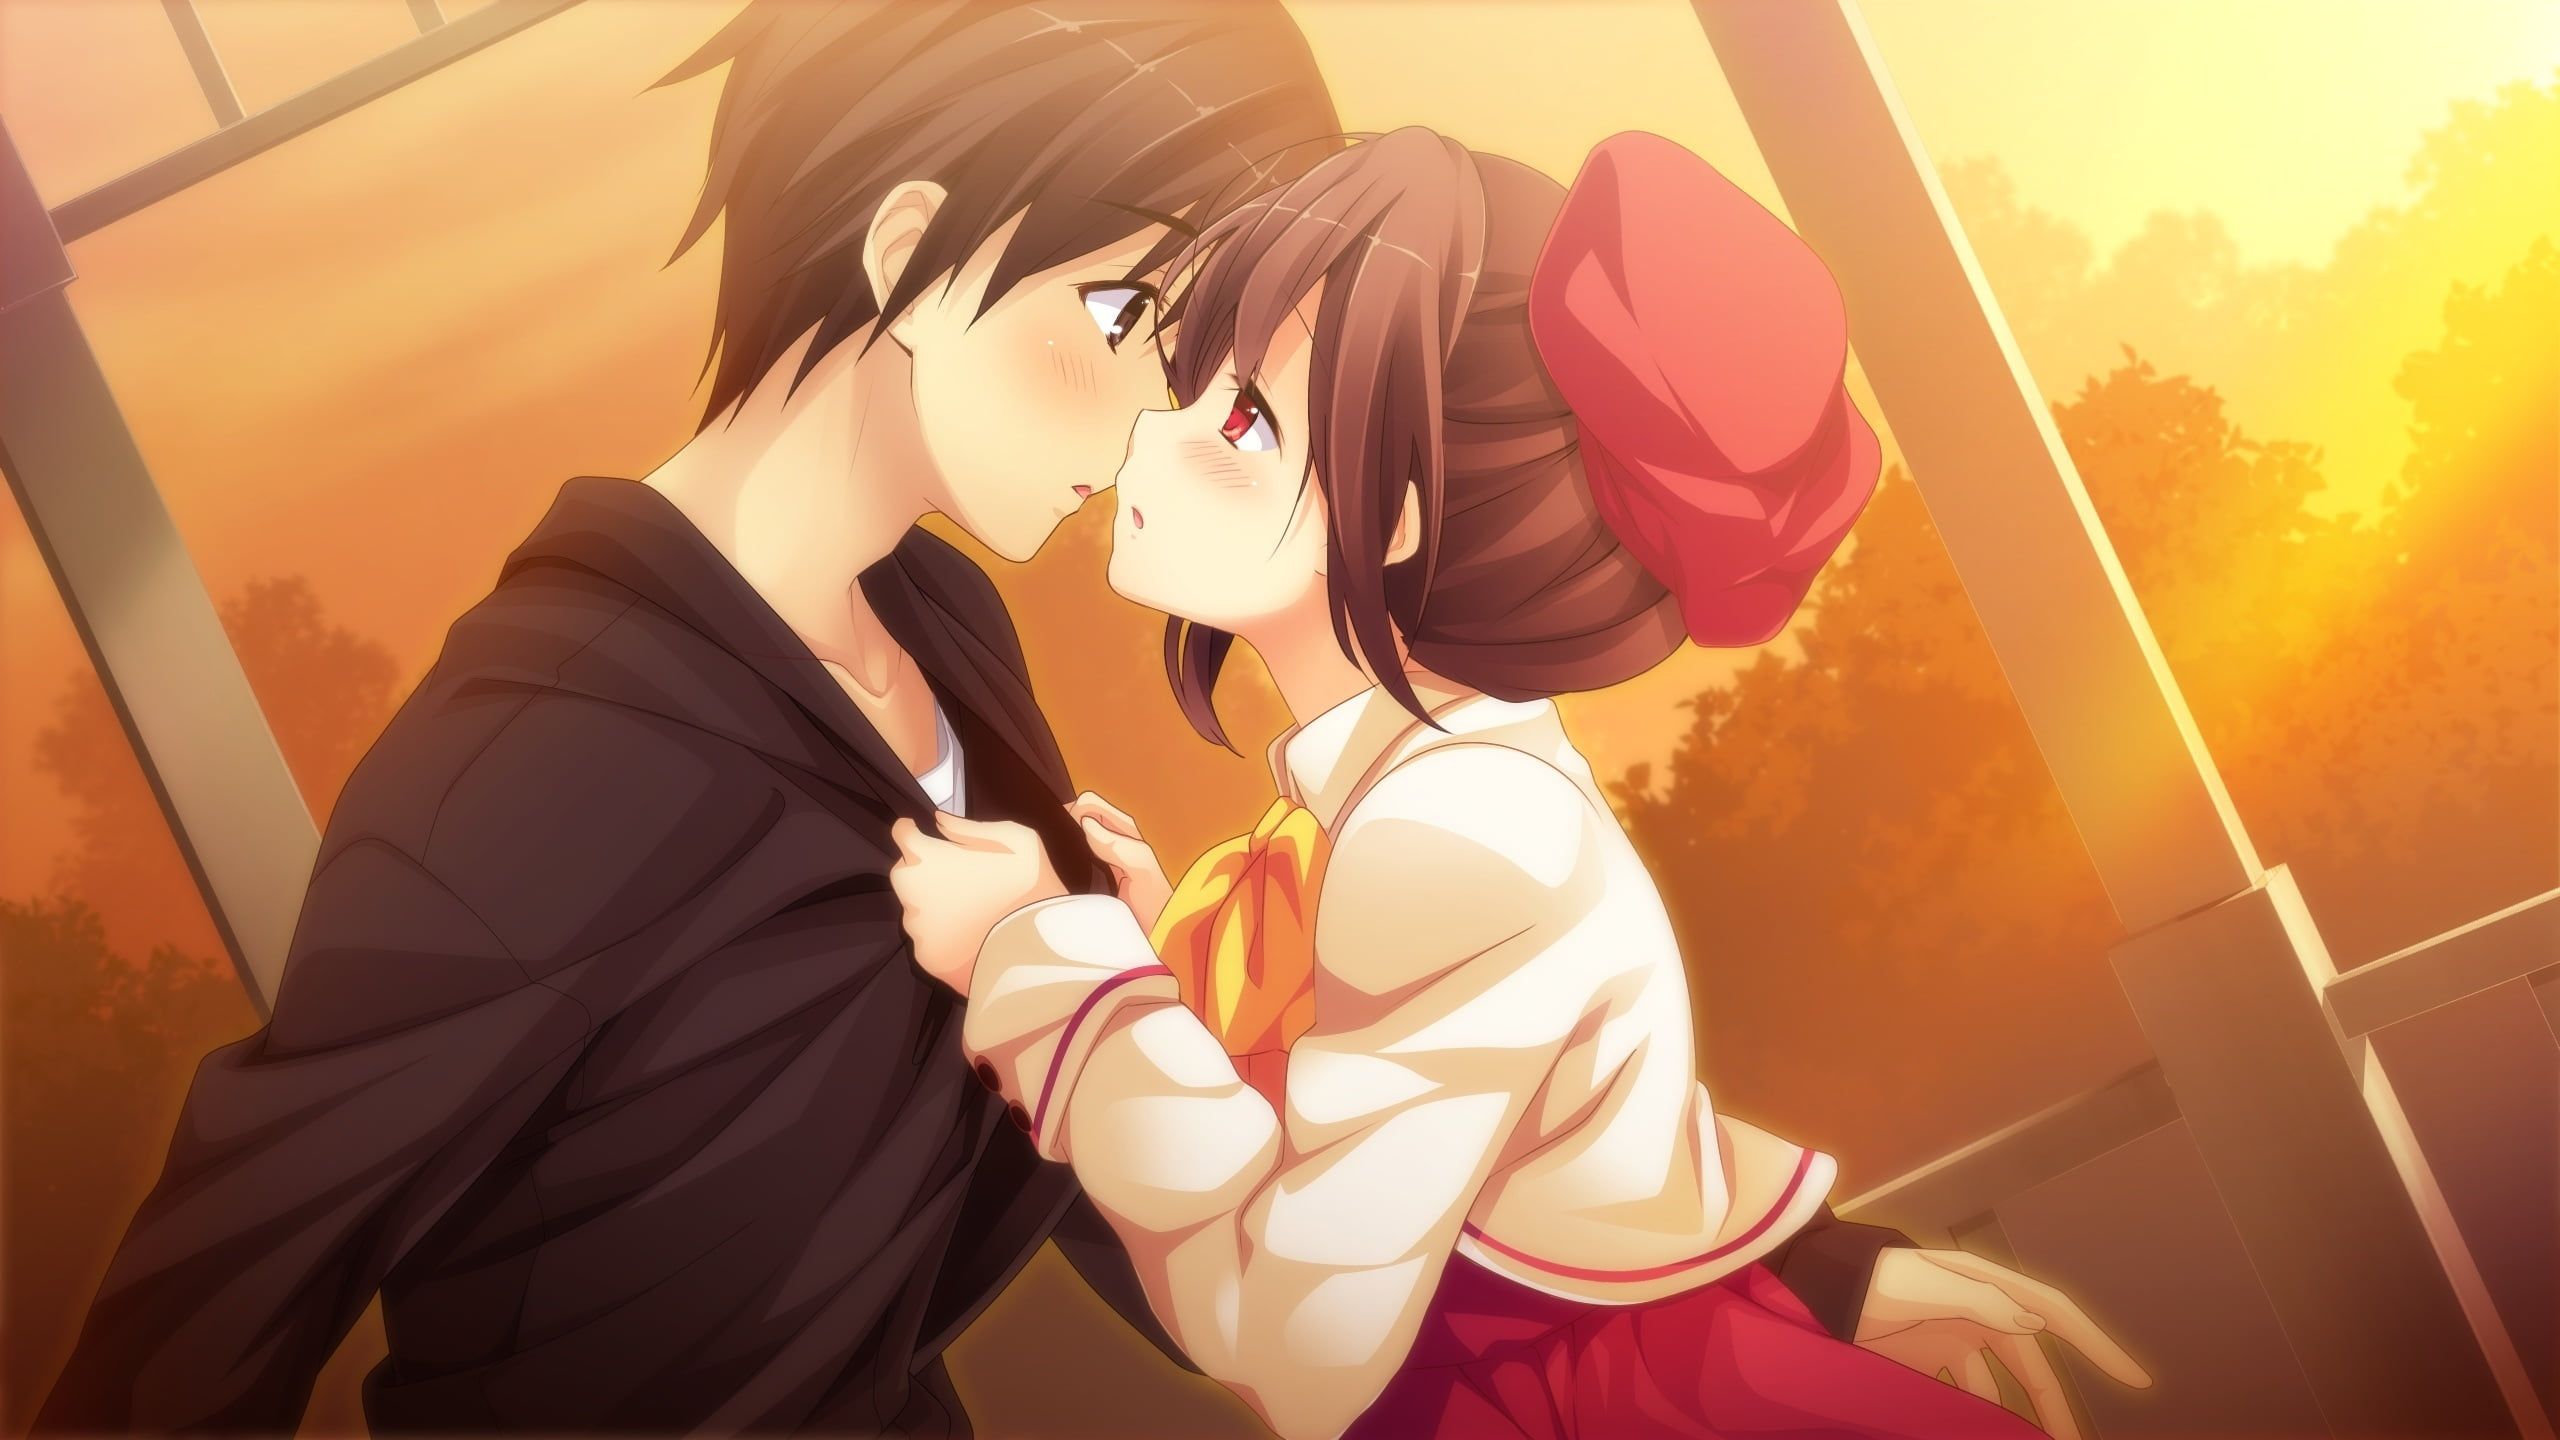 Man and woman anime character HD wallpapers